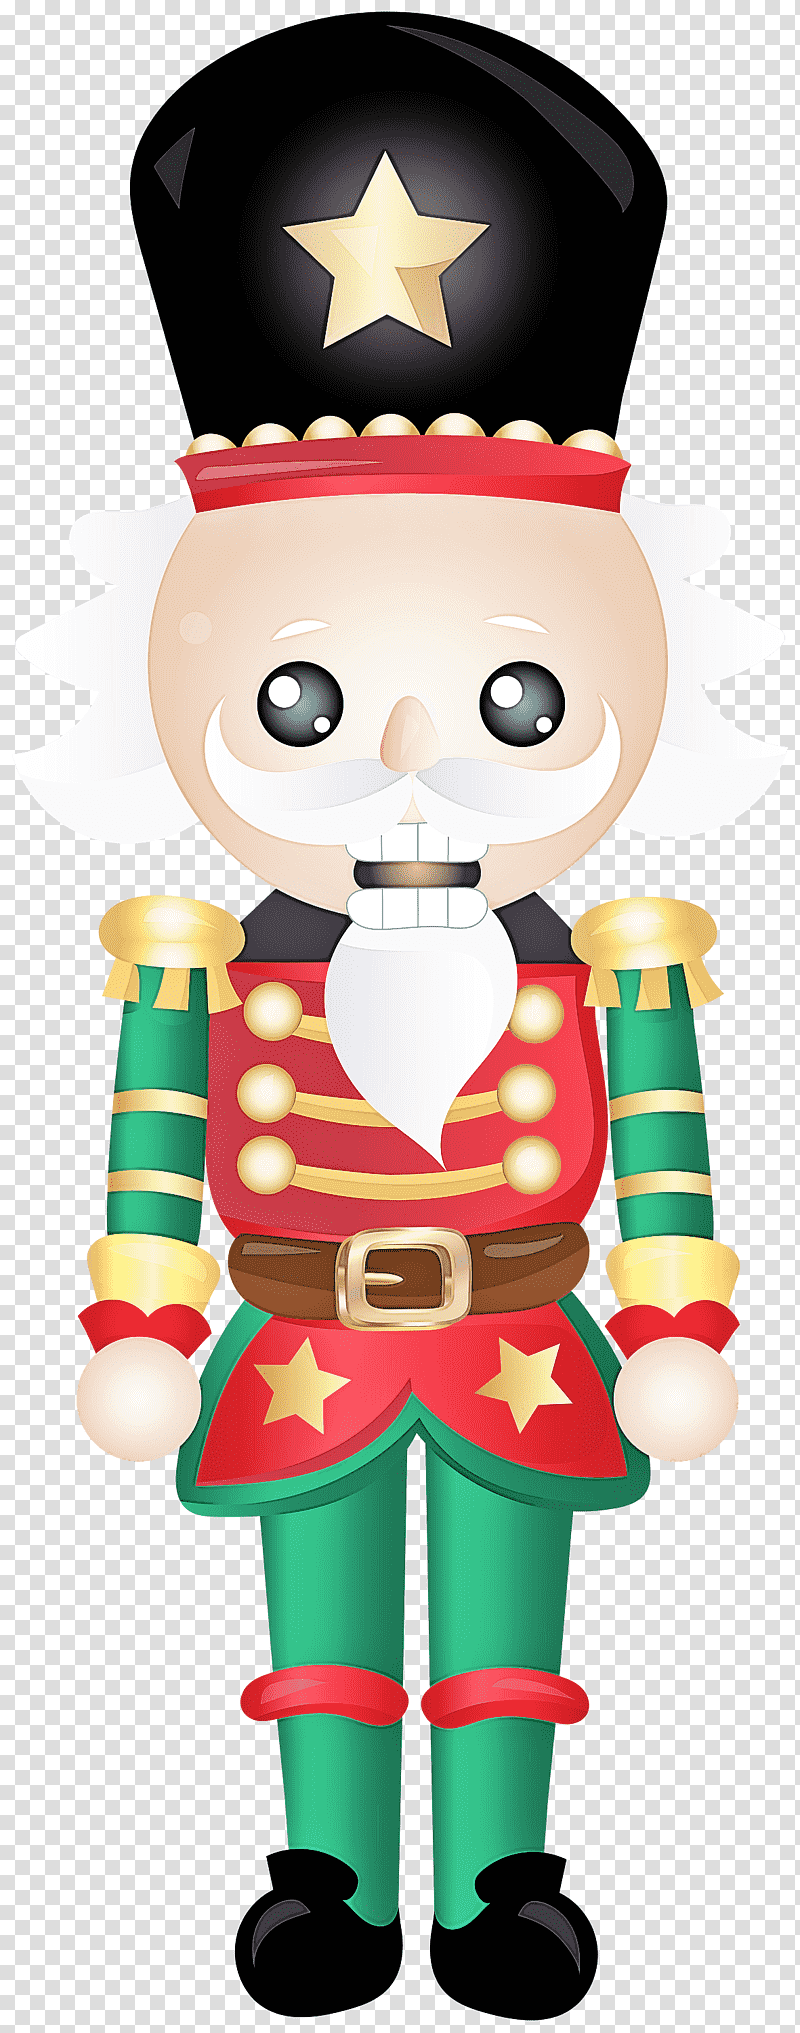 Christmas Day, Christmas Nutcracker, Decorative Nutcracker, Animation, Bauble, Drawing, Birthday transparent background PNG clipart